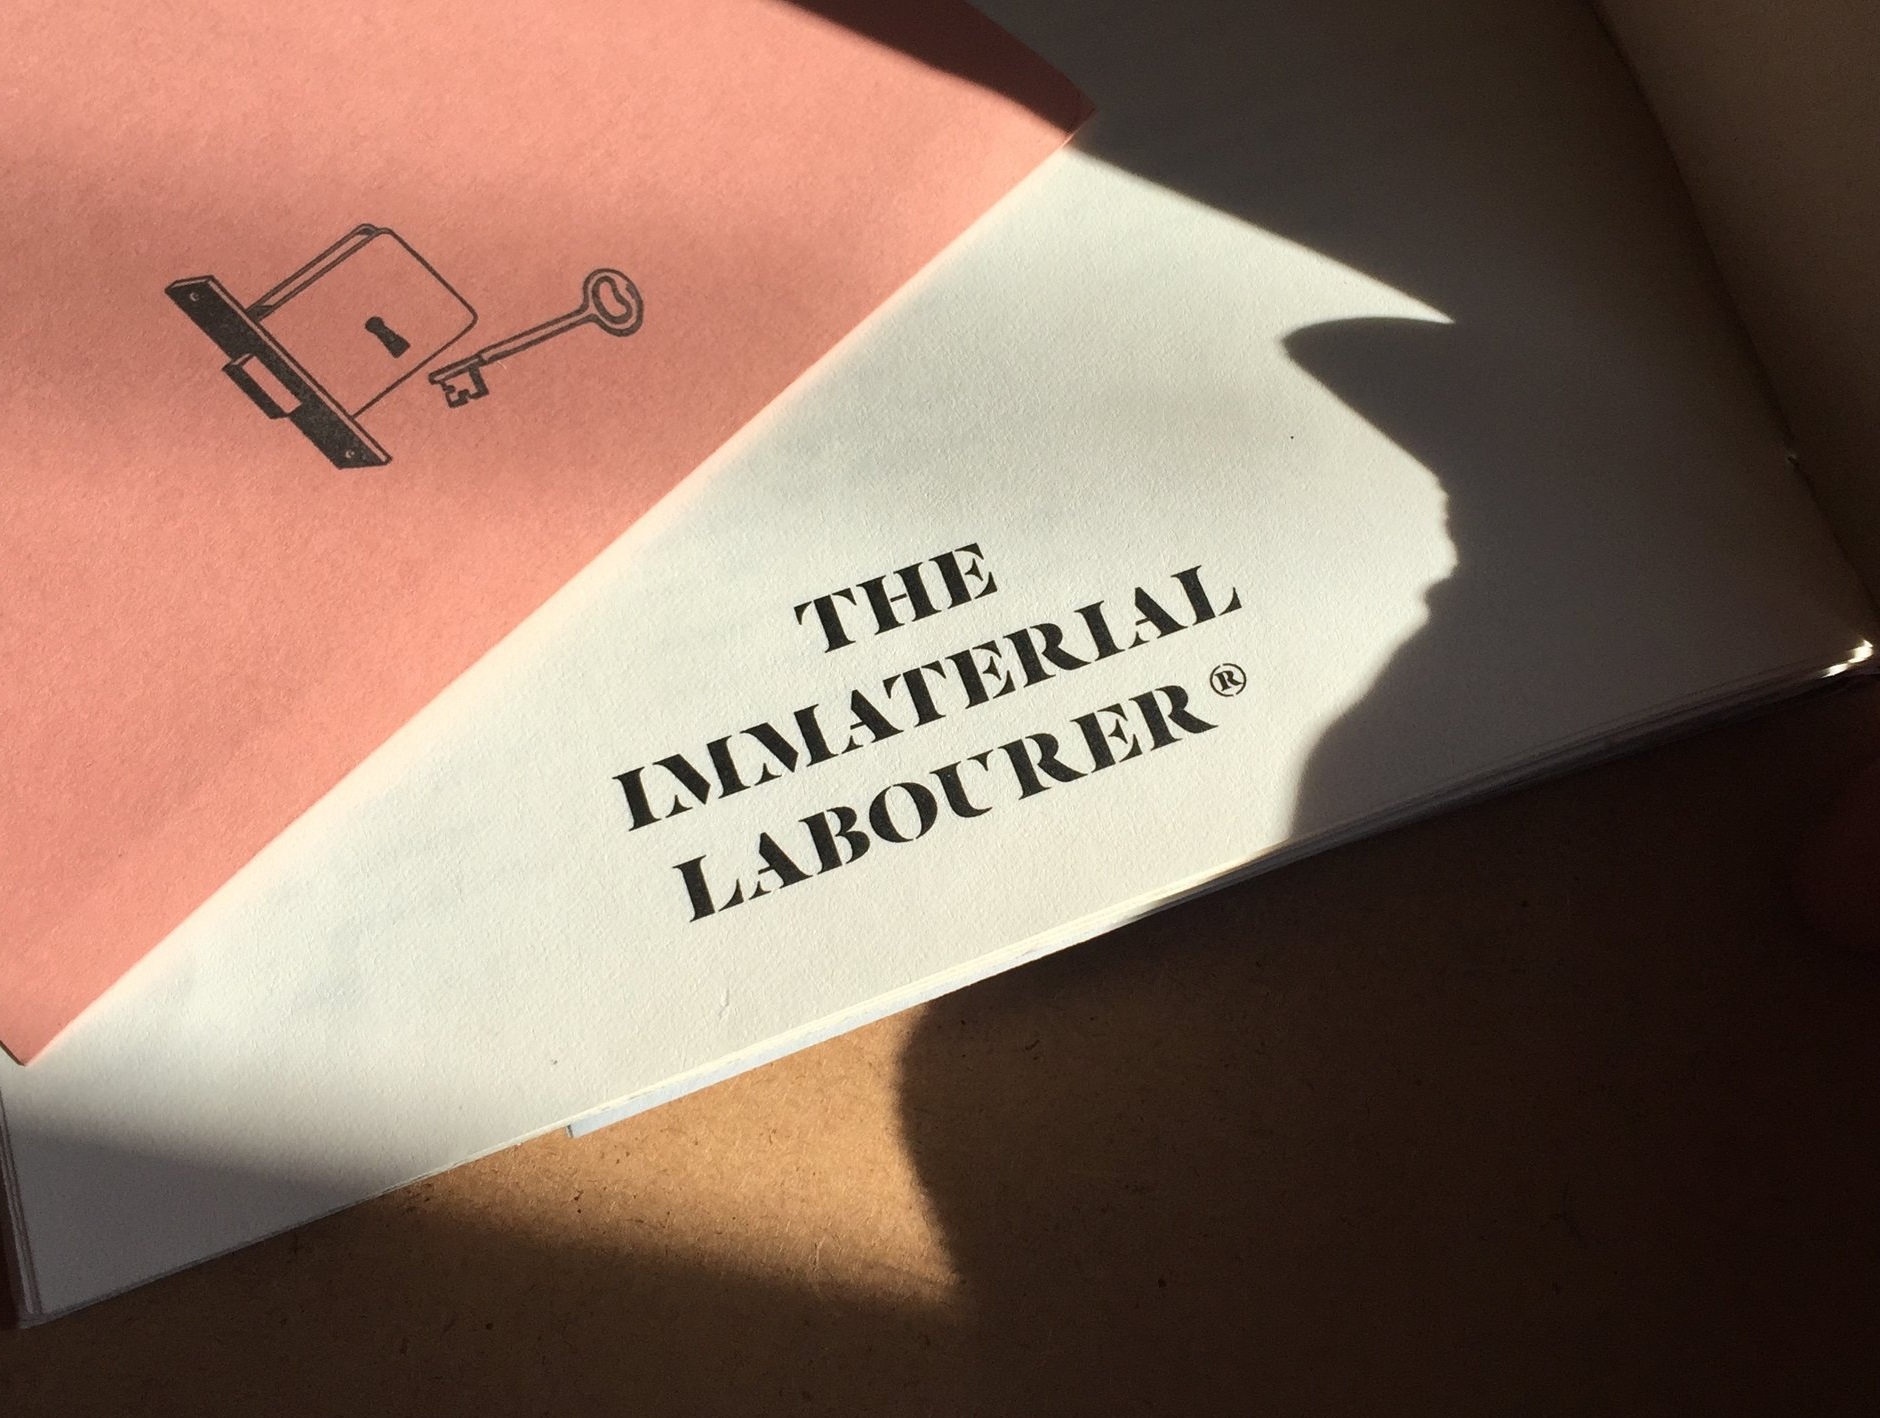 The Immaterial Labourer